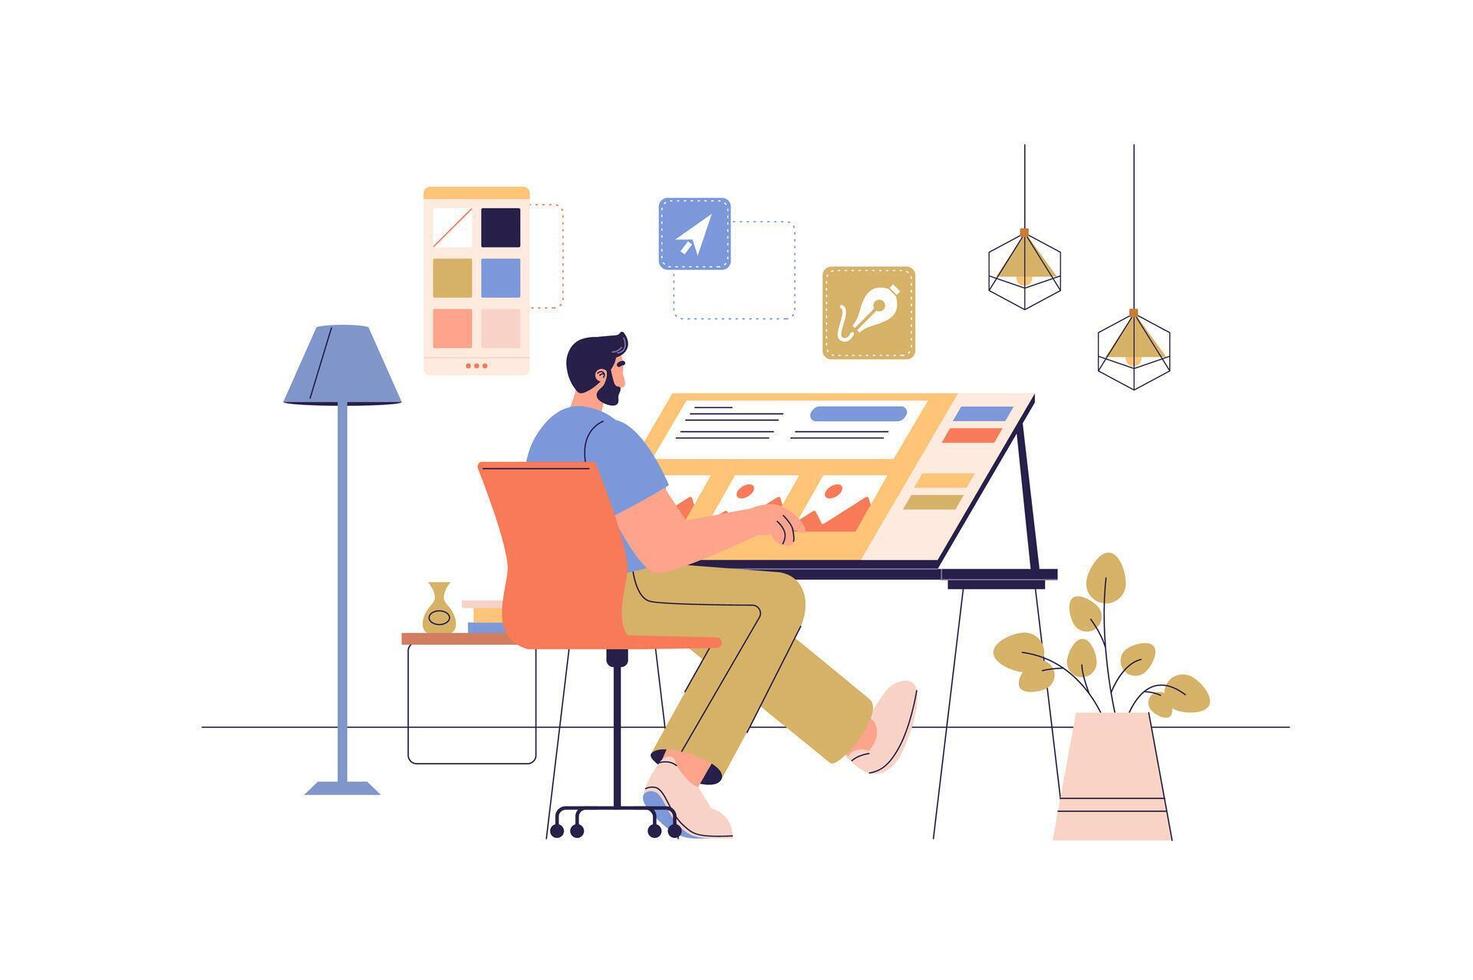 Designer studio web concept with people scene. Illustrator working at drawing table with pen and palette. Creative artist making content. Character situation in flat design. illustration. vector